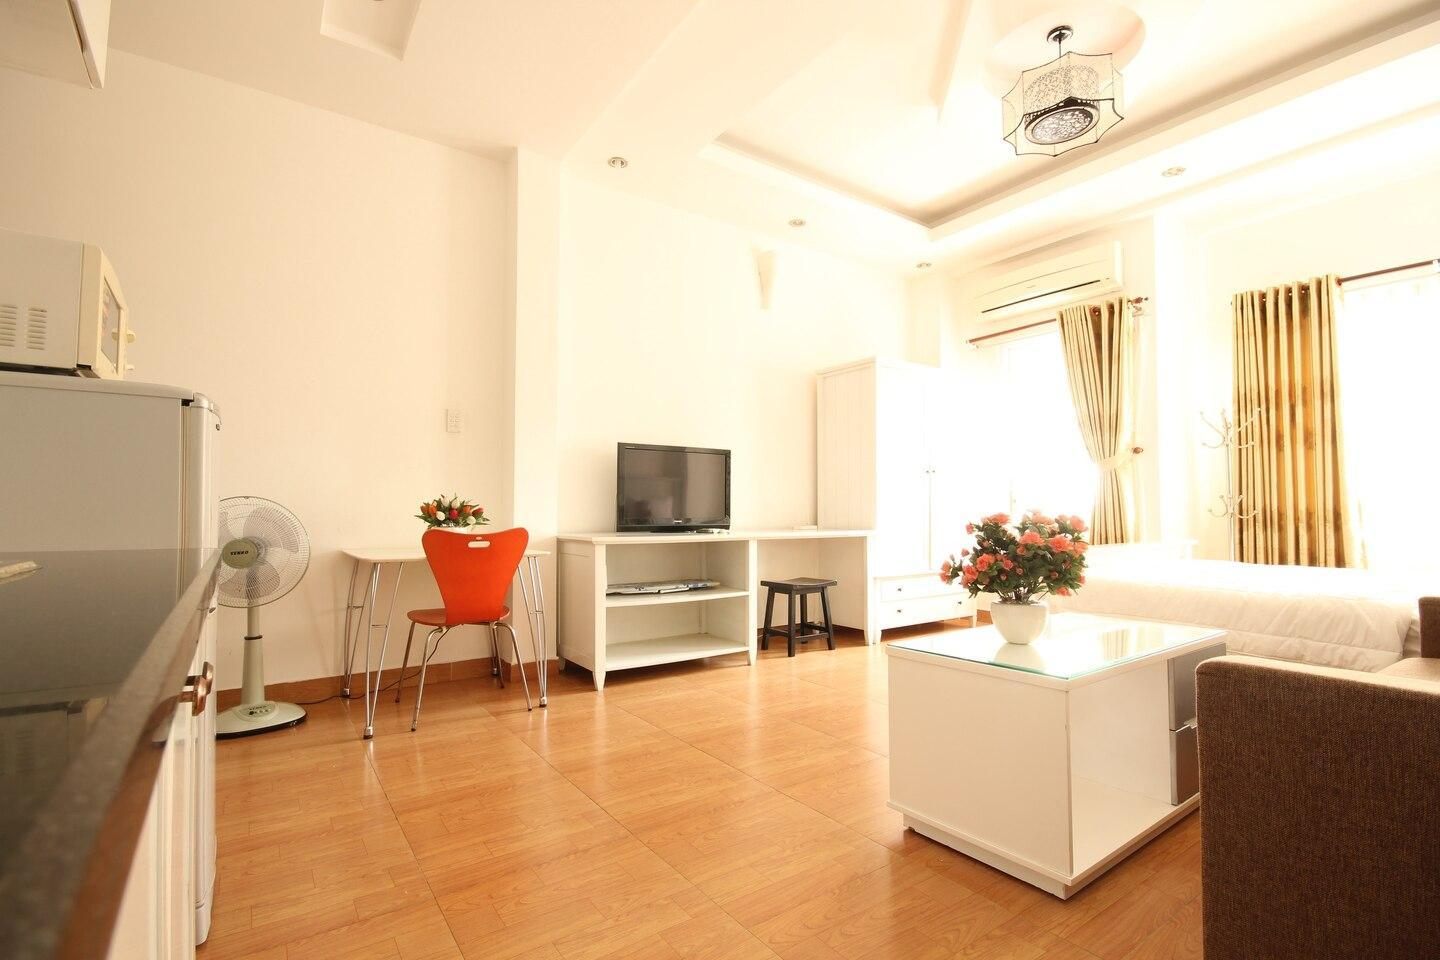 2, Apartment with balcony on Nguyen Trai, dist.1 $390, Quận 1